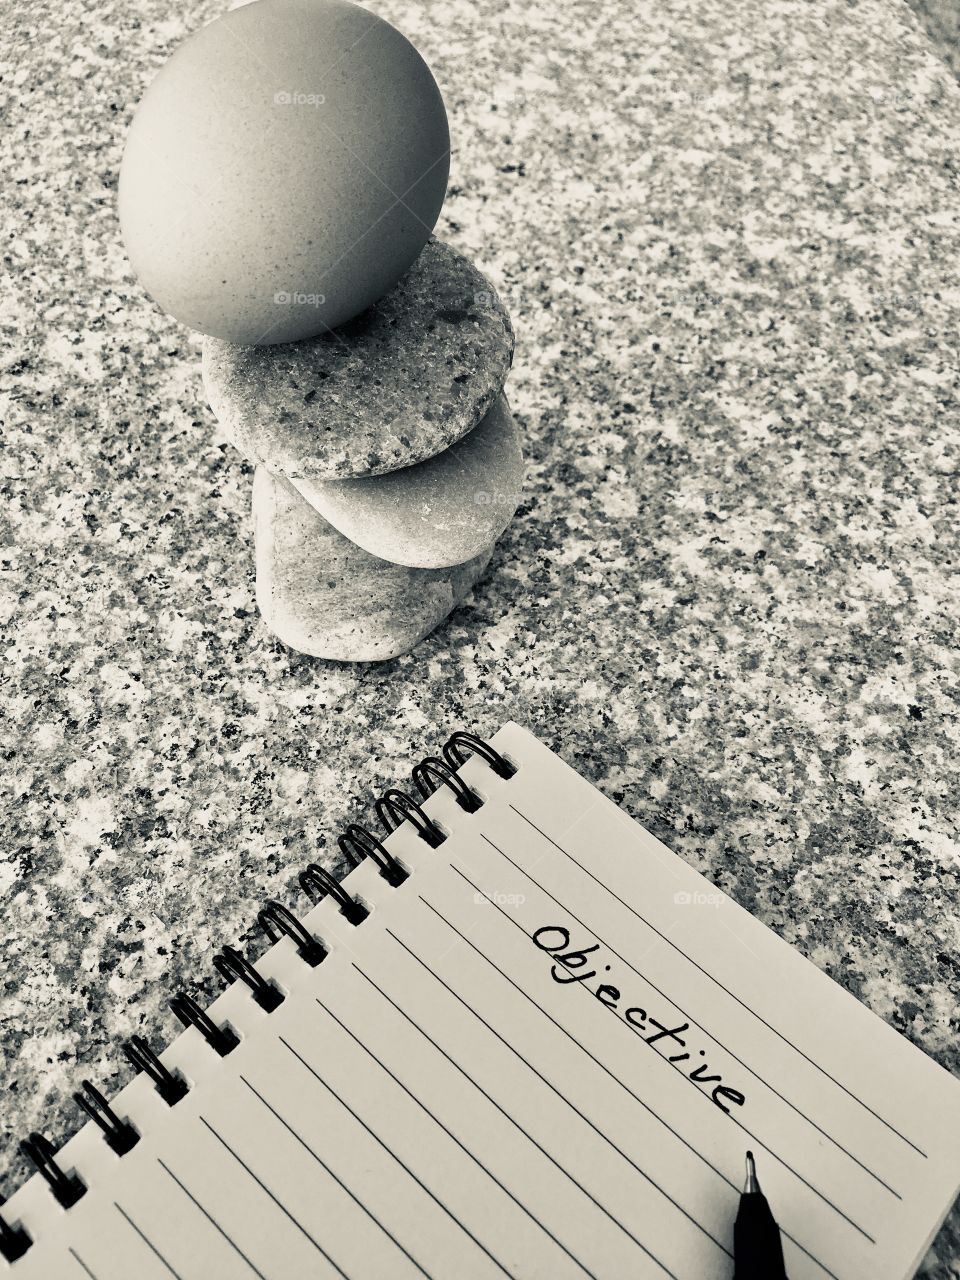 Whole intact hen’s chicken egg balancing atop smooth stone rock stack on marble surface, with spiral notebook and objective handwritten title, concept business, motivational, or life applications, black and white with copy space